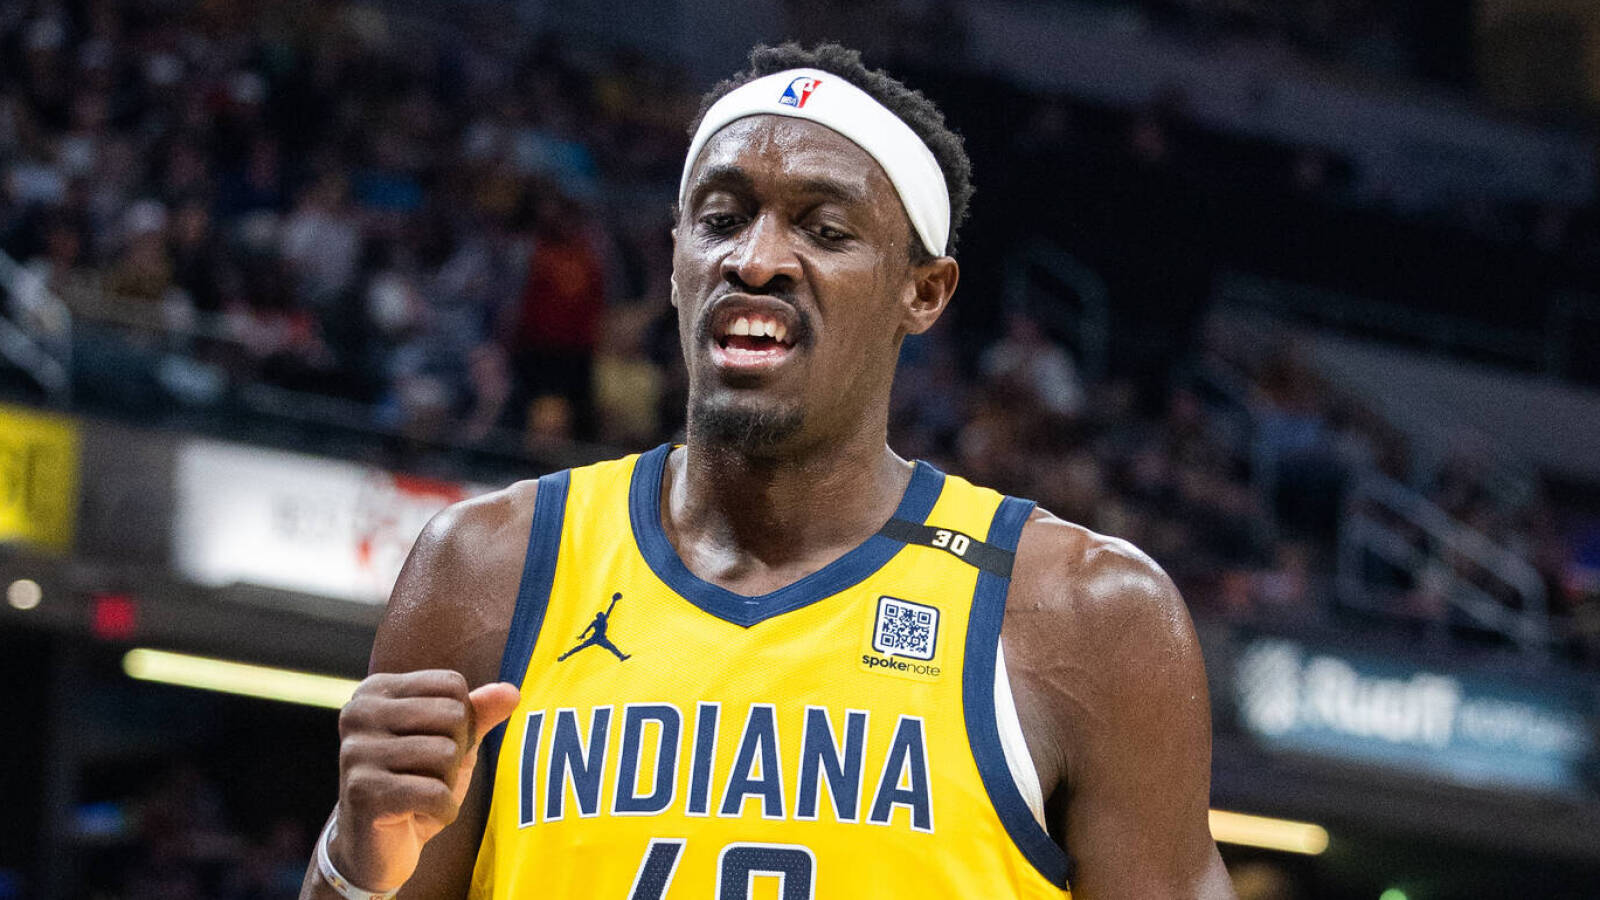 Pascal Siakam joins elite company with huge performance in Pacers’ Game 2 win over Bucks